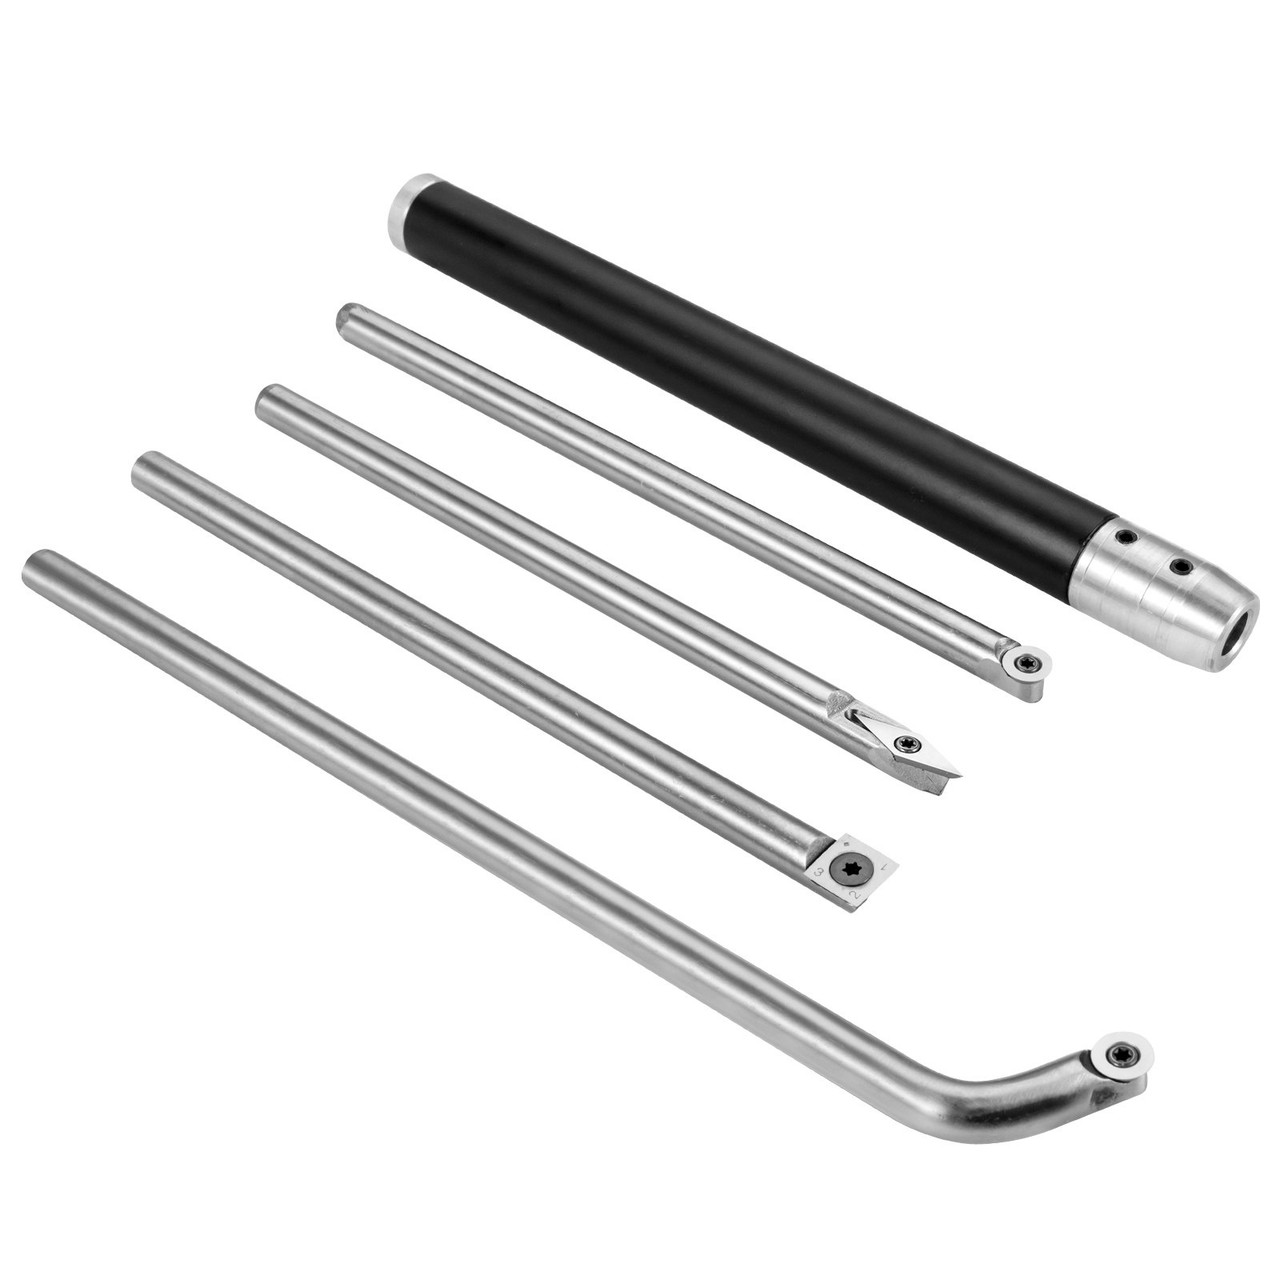 Wood Turning Tools for Lathe 4 PCS Set, Carbide Lathe Tools with Diamond Shape, Round, Square Cutters Replaceable Turning Lathe Chisels with a Grip Handle Lathe Tools for Craft DIY Hobbyists